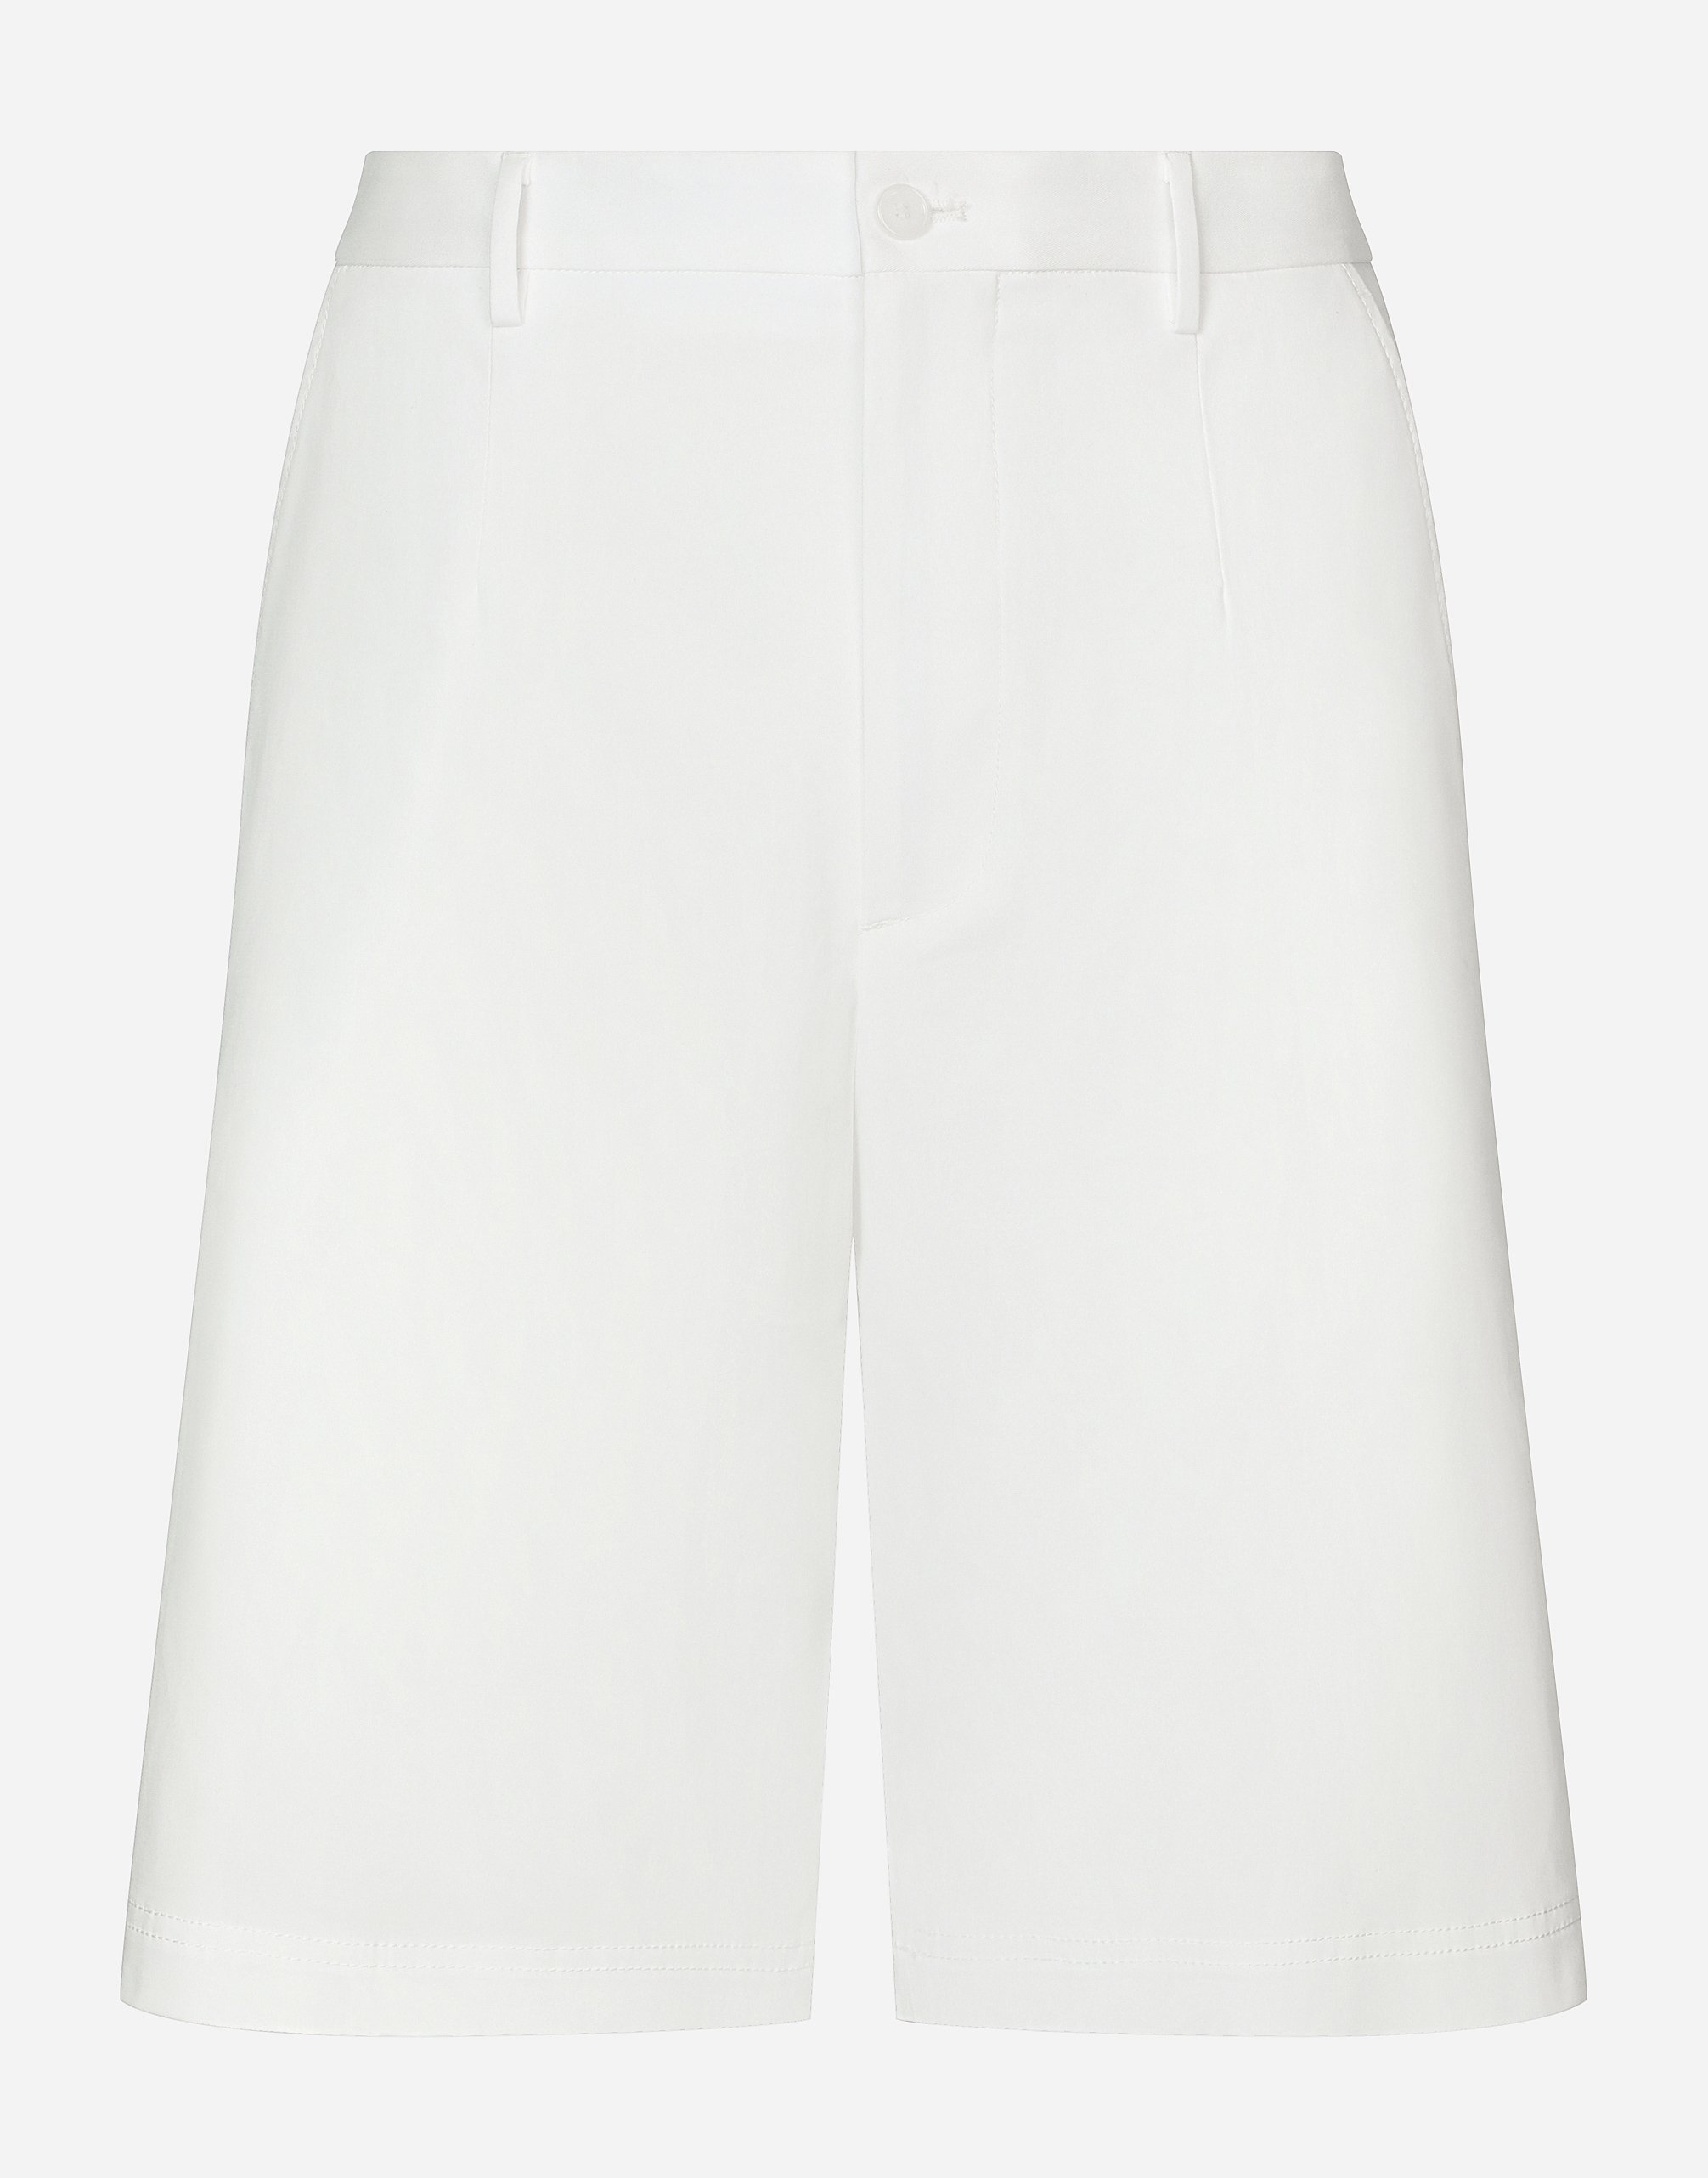 Dolce & Gabbana Stretch Cotton Shorts With Branded Tag In White